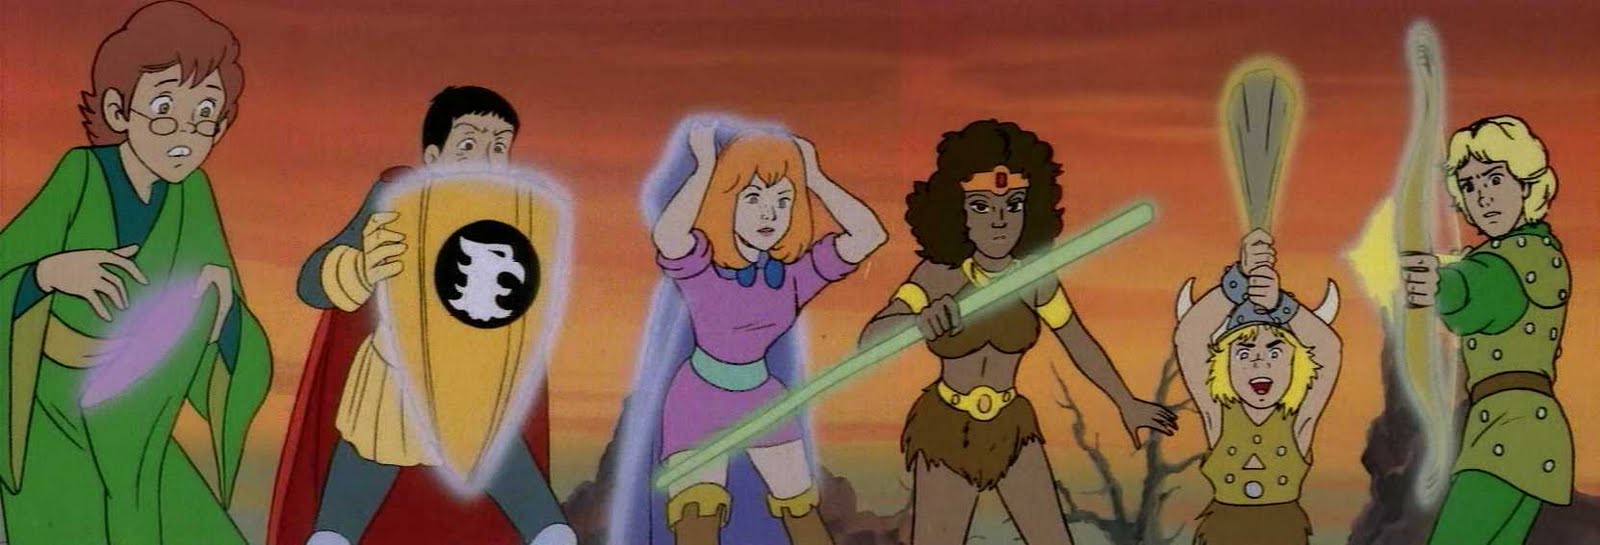 Dungeons & Dragons Strategy Game to Add Characters from the Classic 1980s  D&D Cartoon - IGN